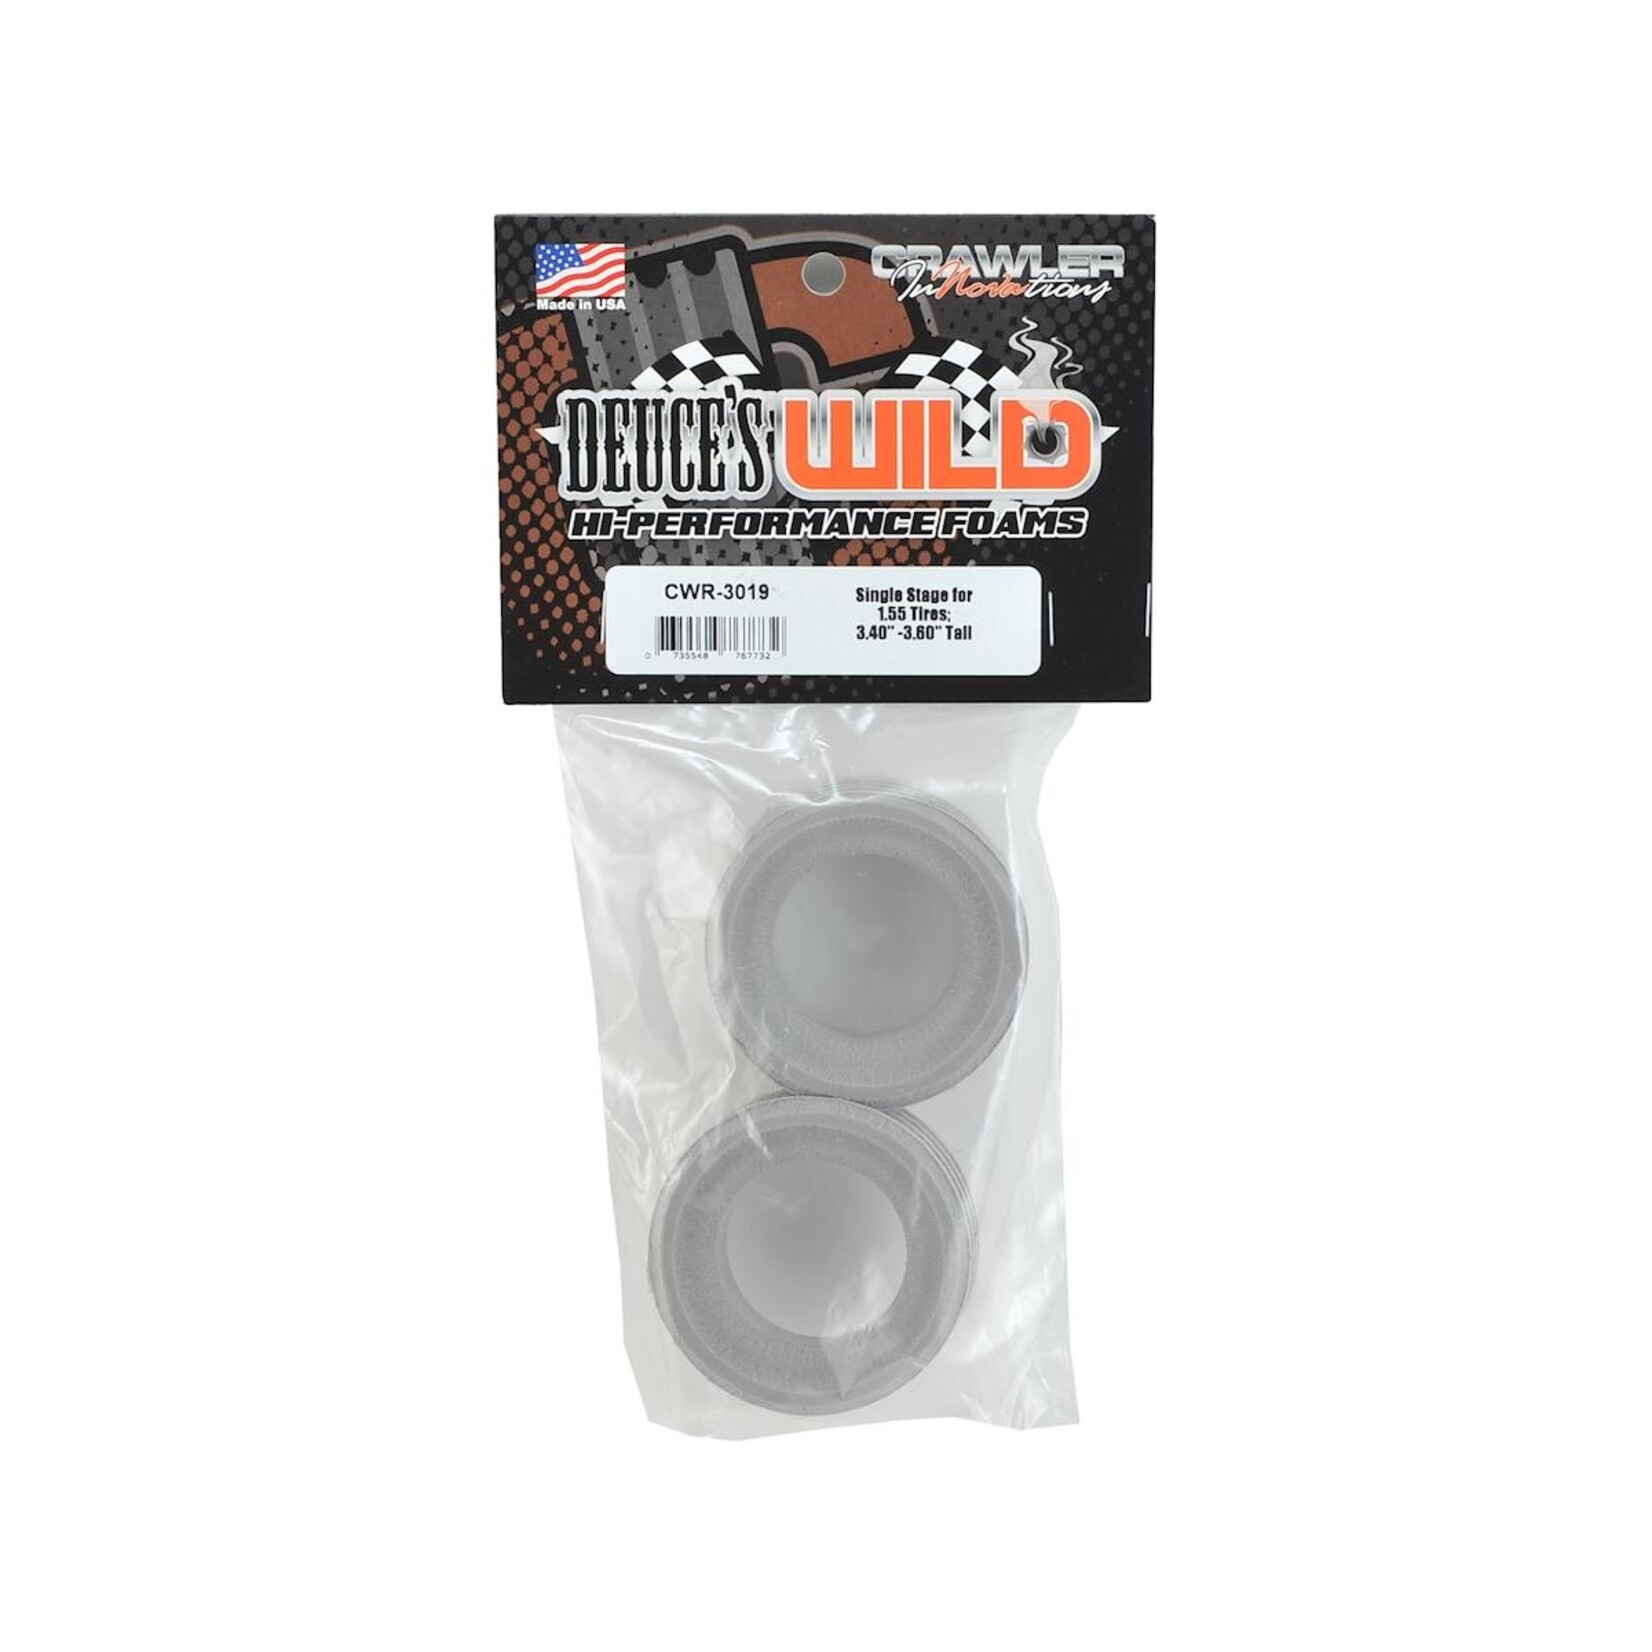 Crawler Innovations Crawler Innovations "Deuce's Wild" 1.55" Single Stage Closed Cell Foam (2) #CWR-3019